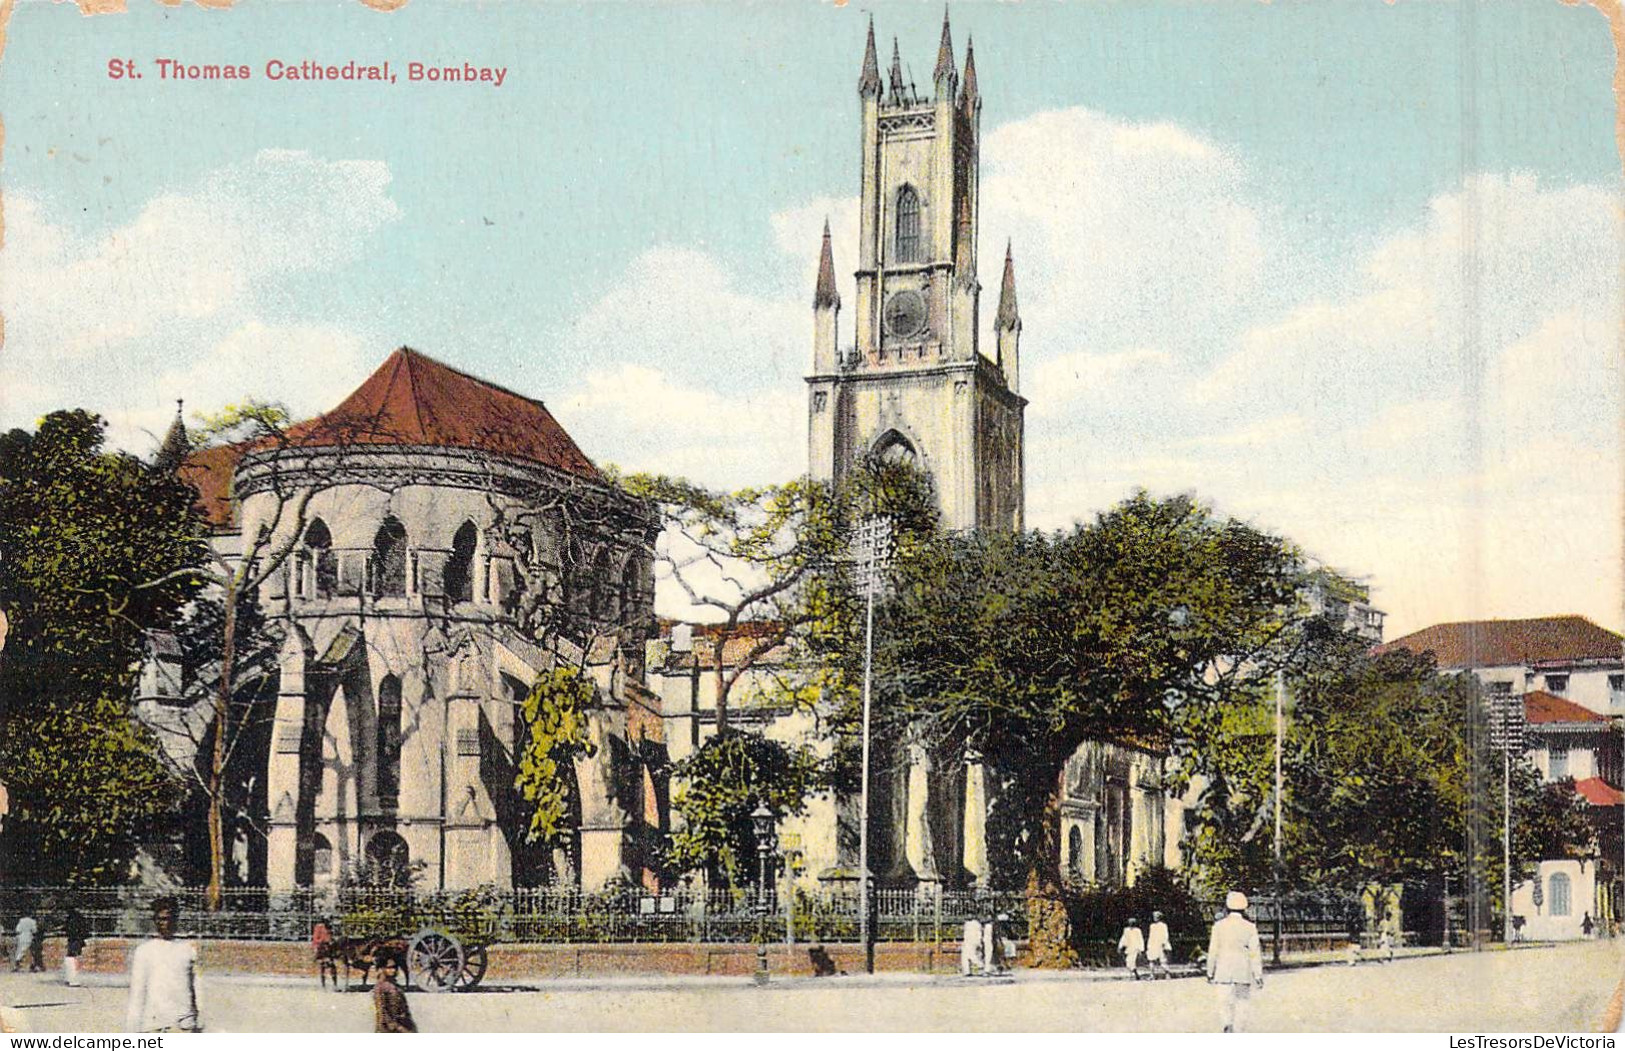 INDE - Bombay - St. Thomas Cathédral - Carte Postale Ancienne - India